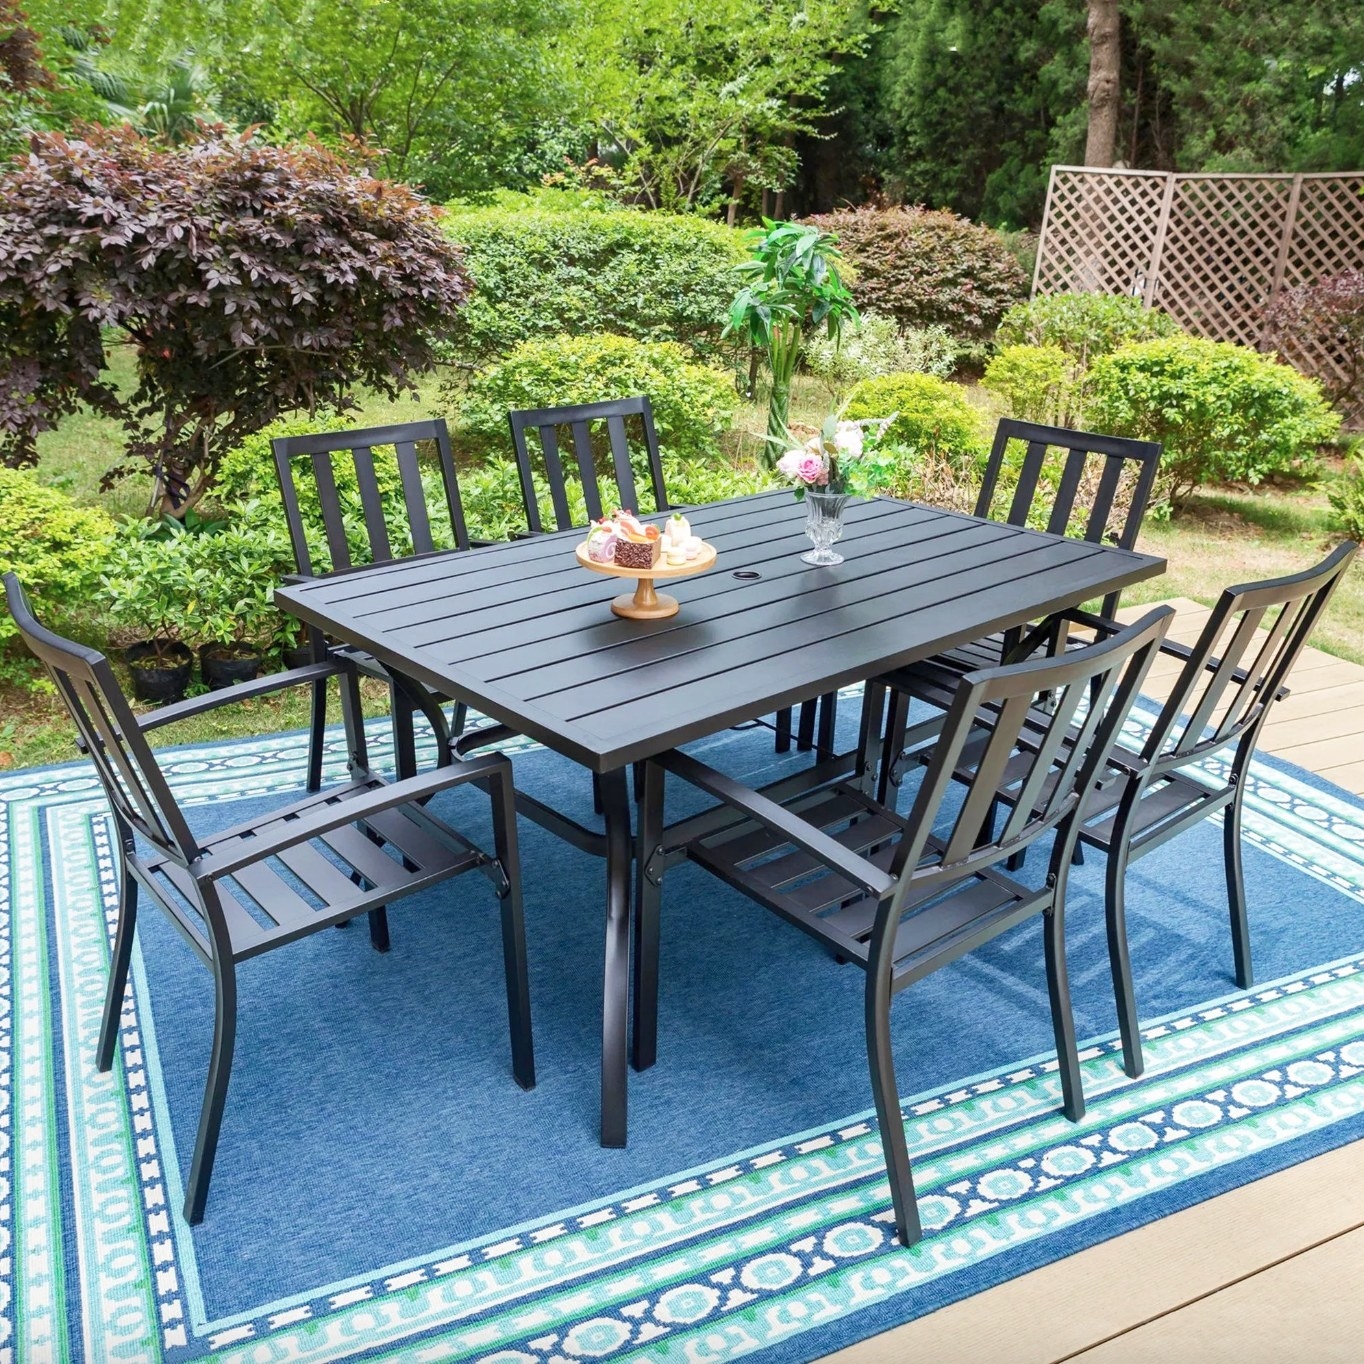 the black steel table and six chairs in a decorated patio space